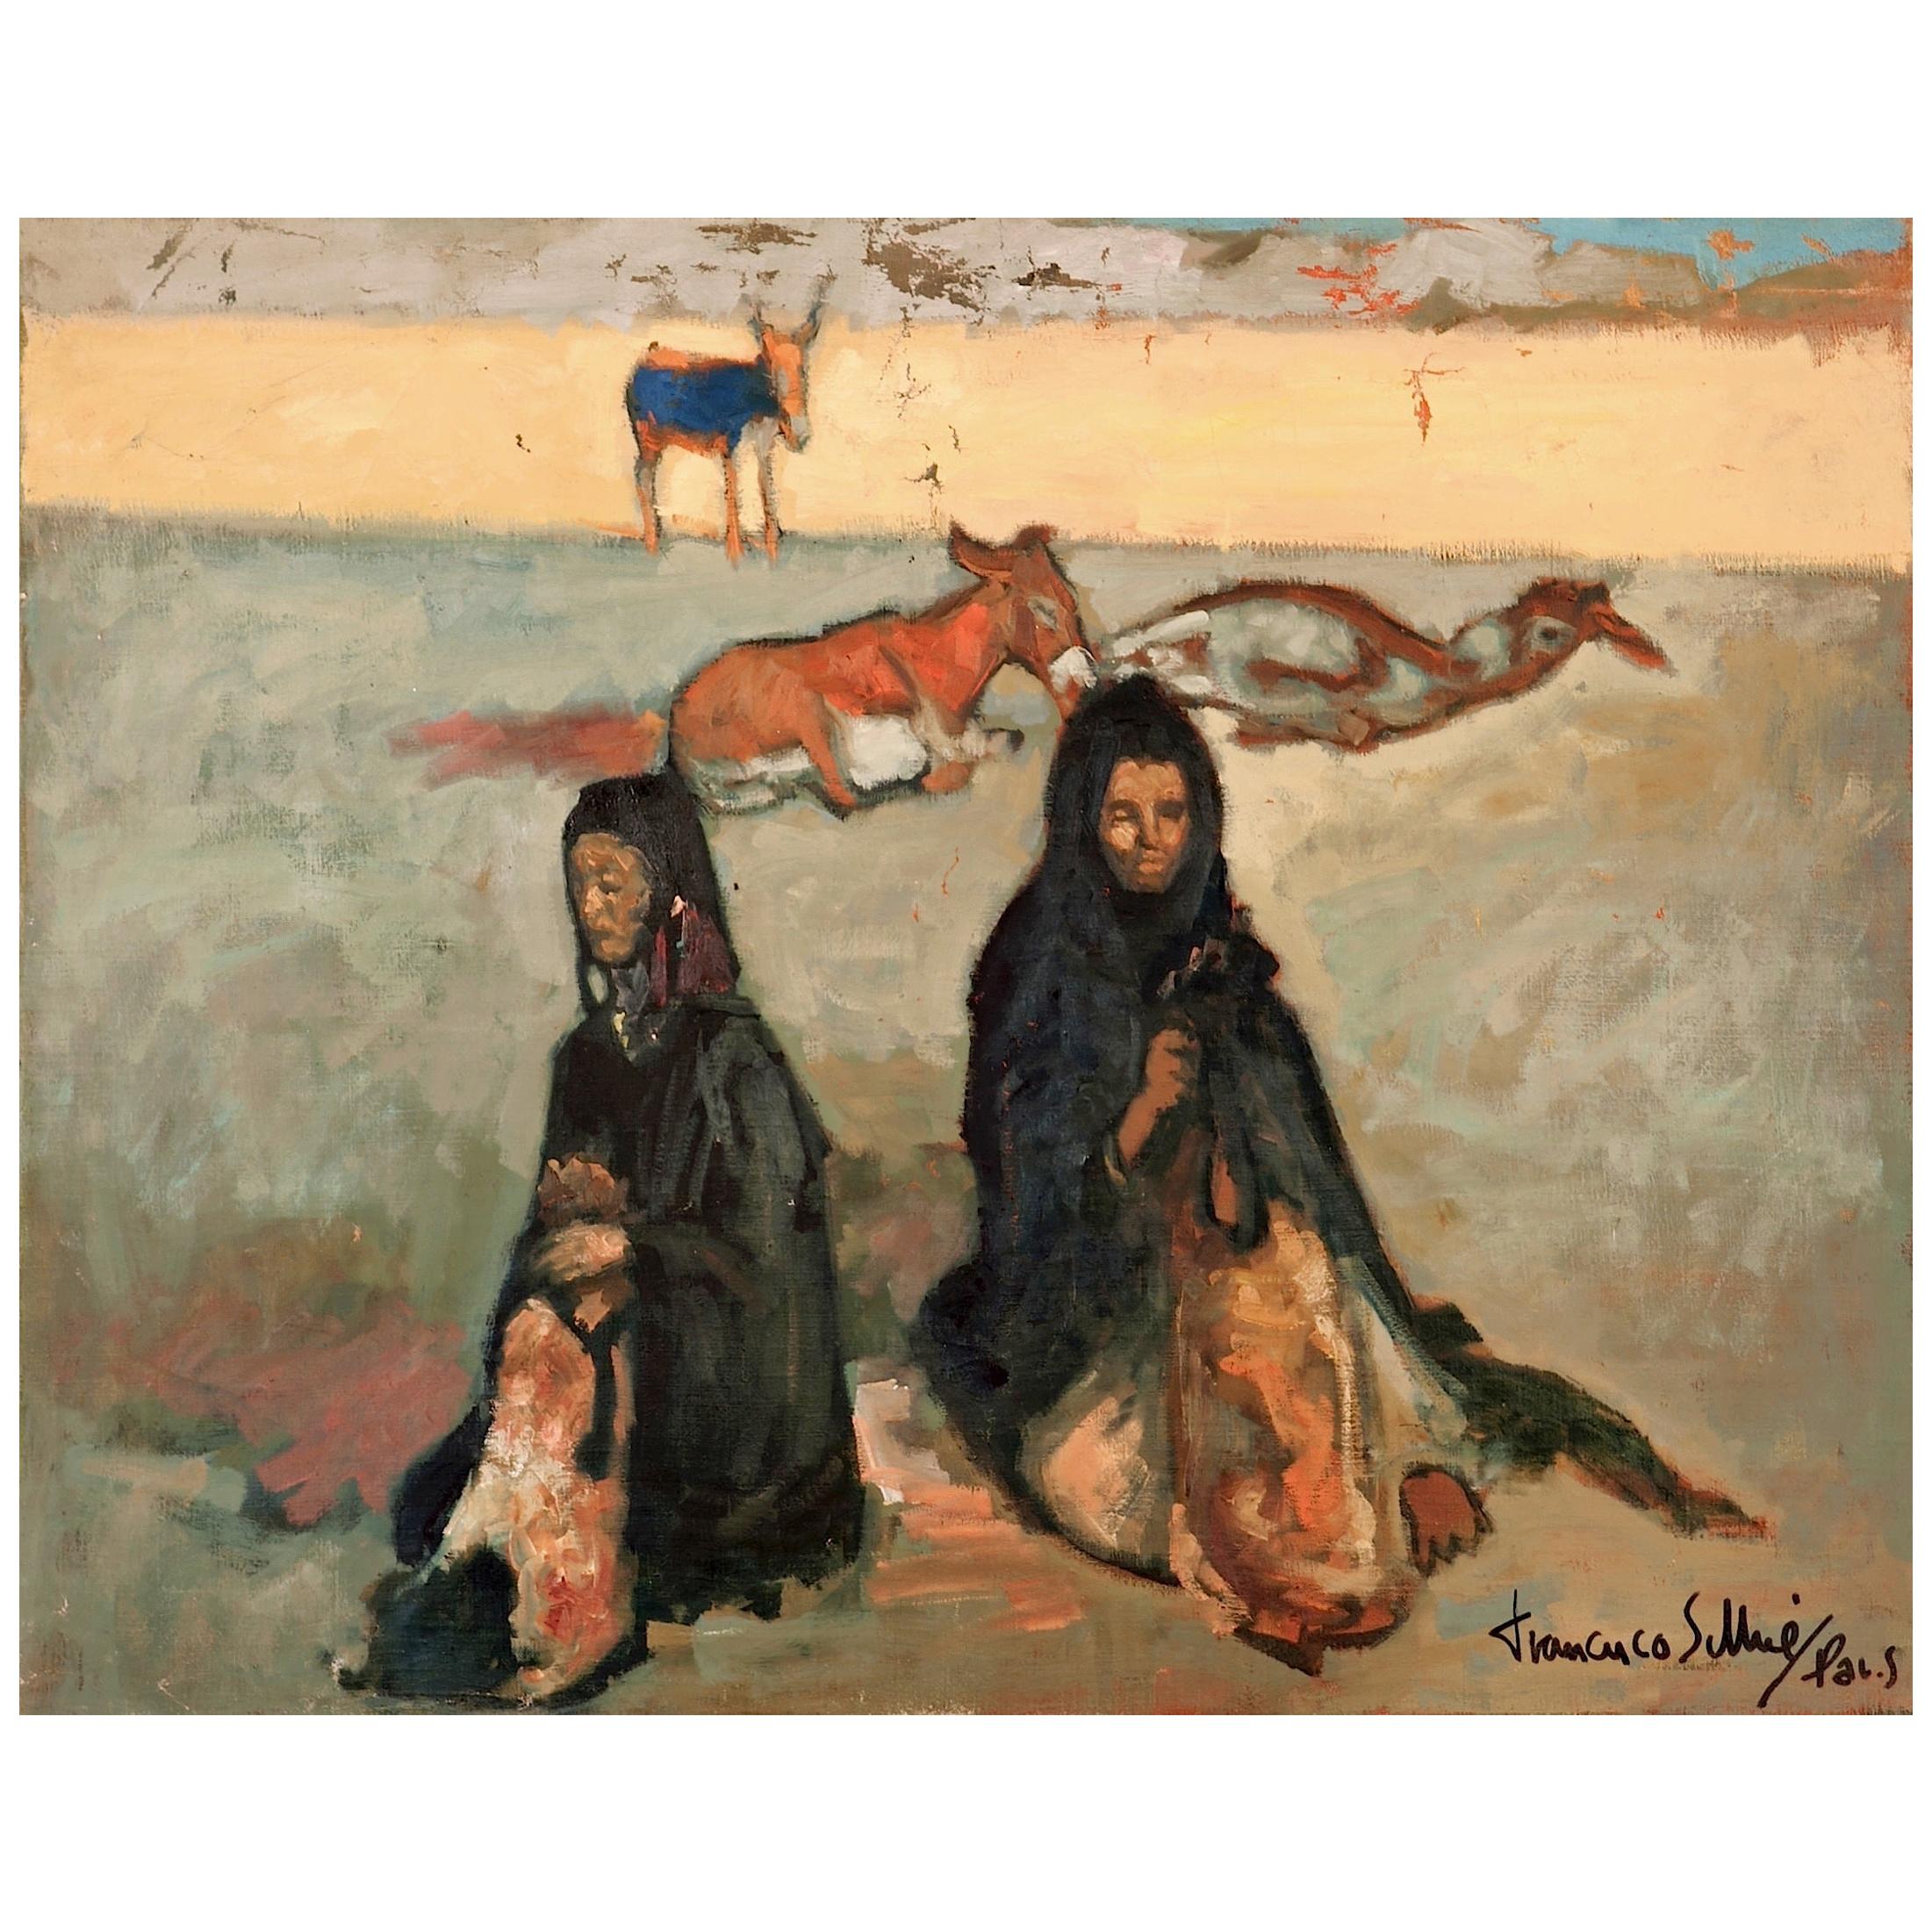 Francisco Sillué Painting of Gypsies